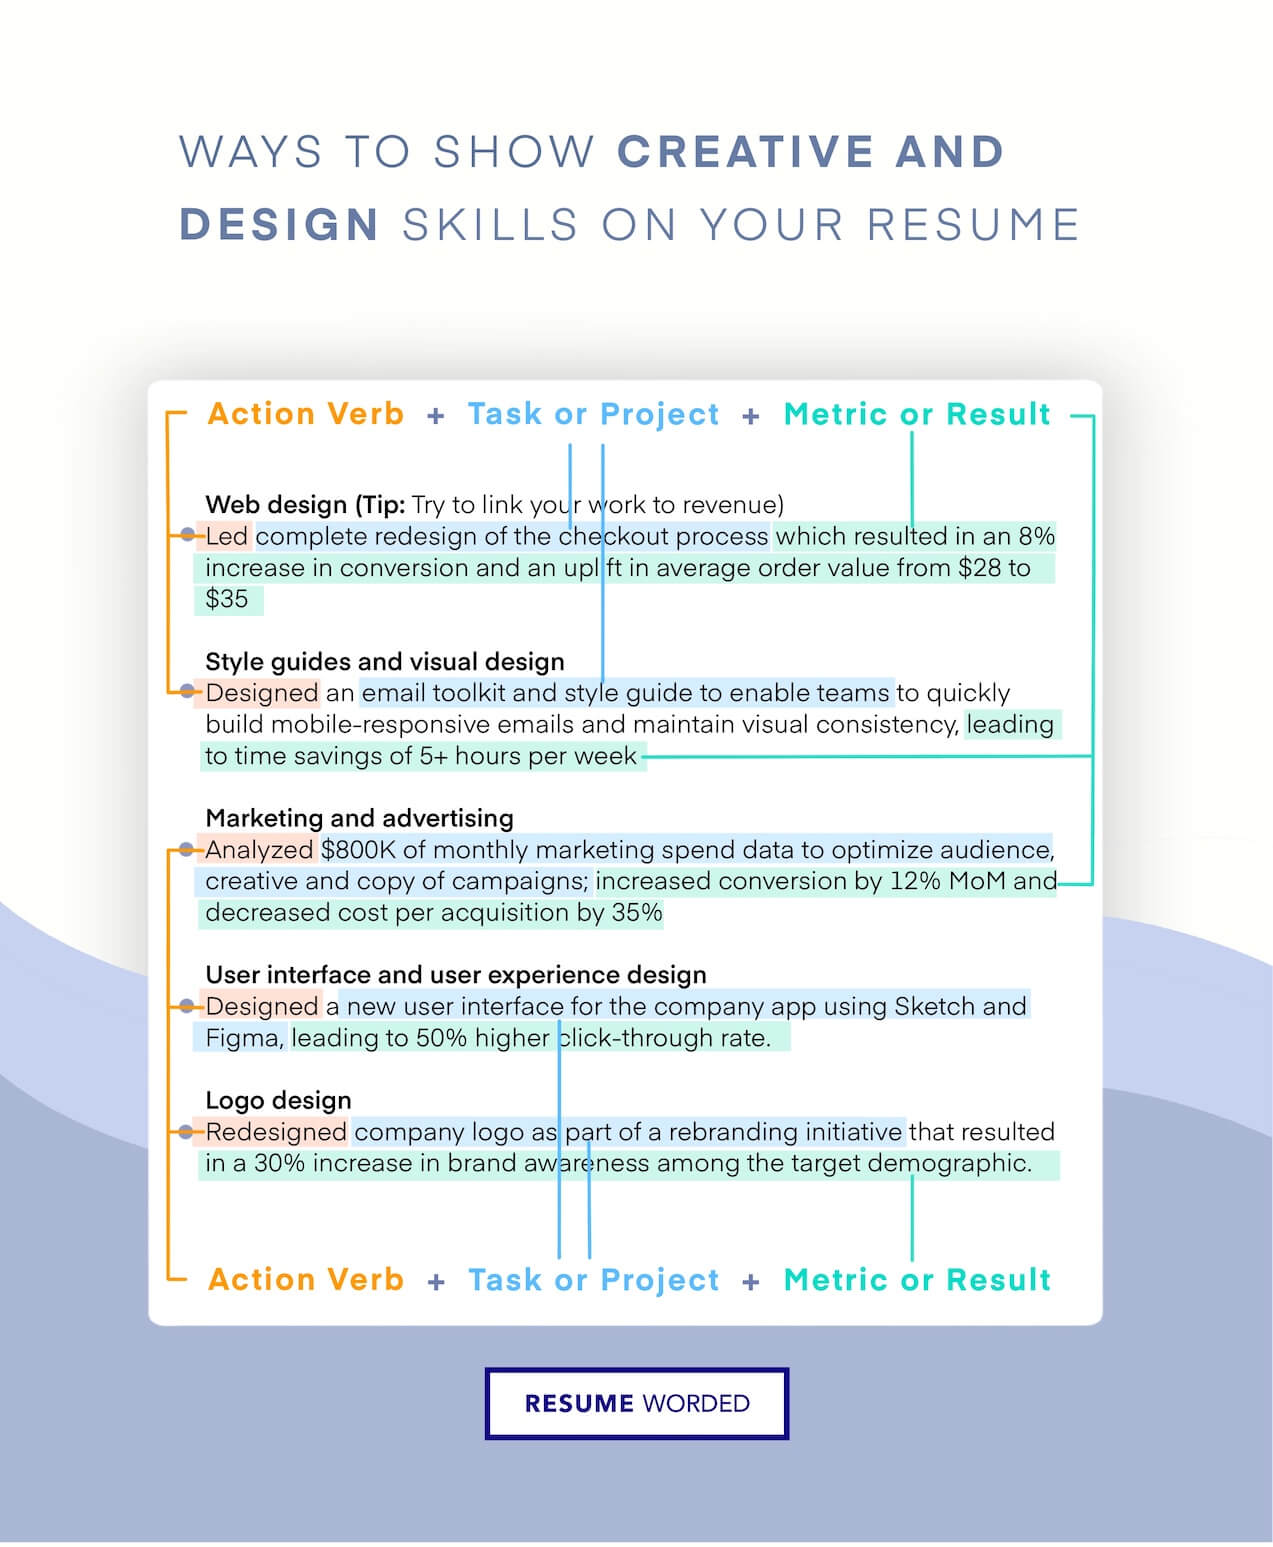 Showcase your ability to find creative solutions - Operations Manager Resume